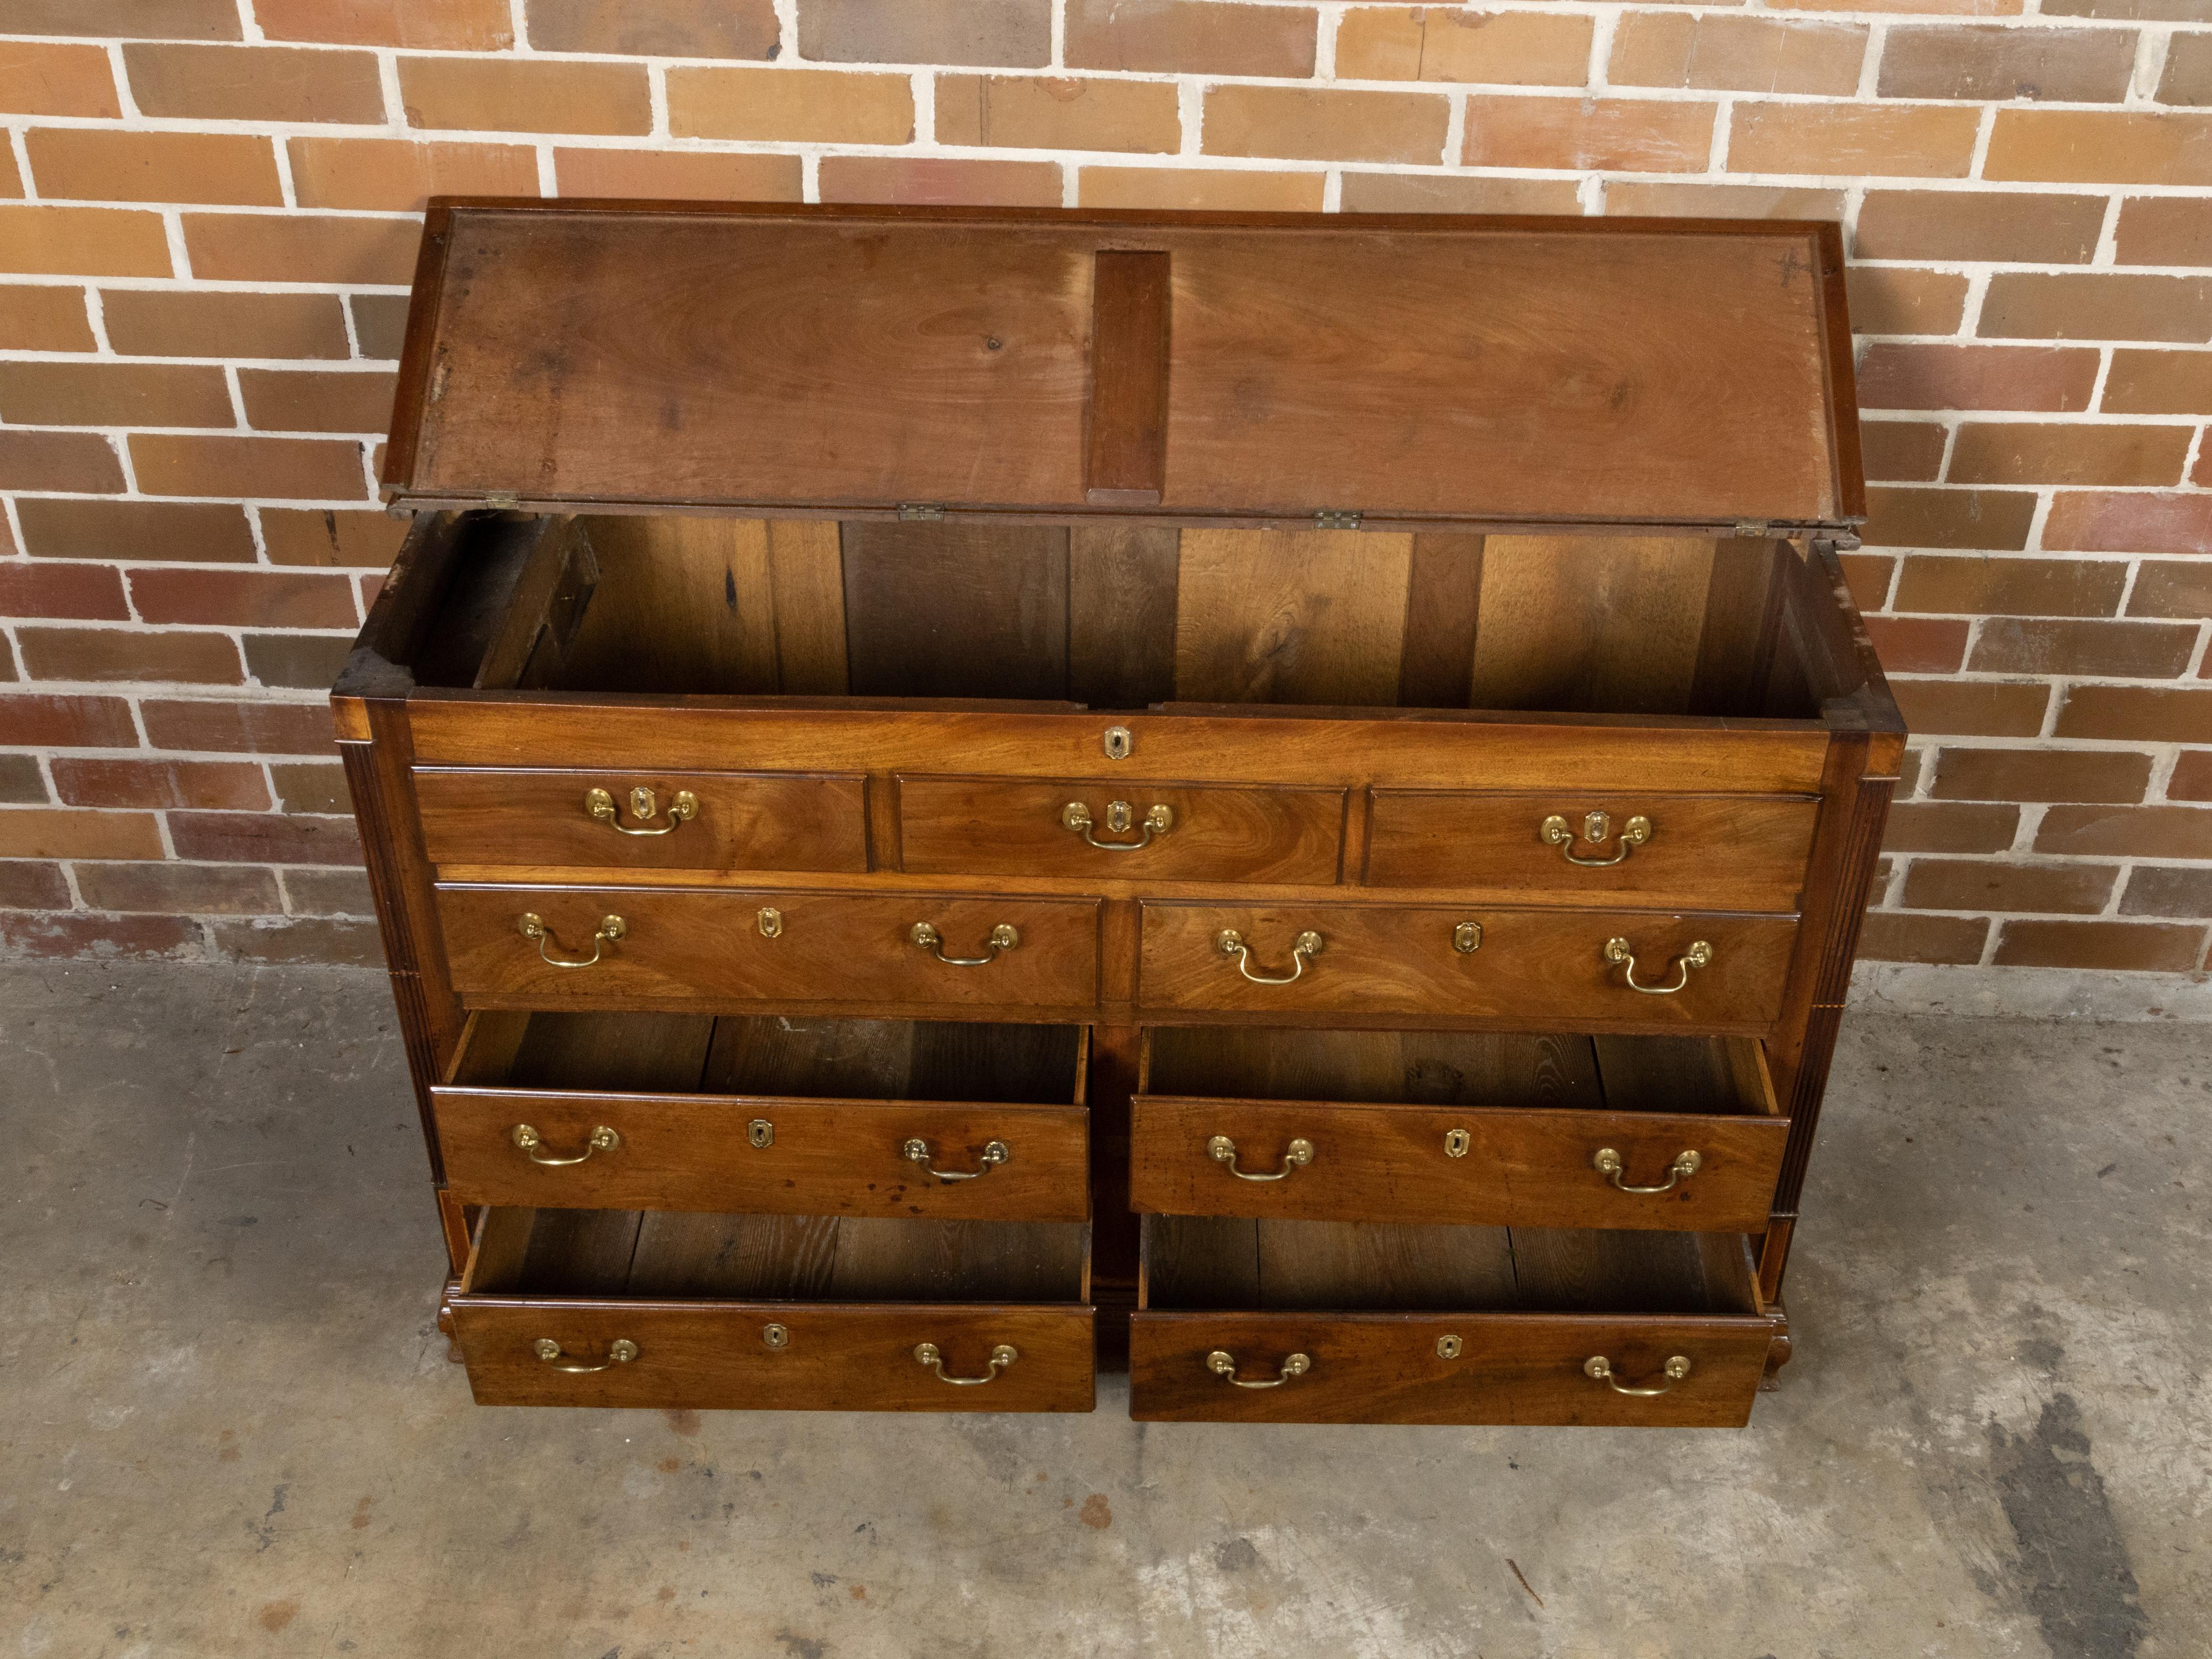 English Walnut 19th Century Flip Top Sideboard with Drawers and Brass Hardware In Good Condition For Sale In Atlanta, GA